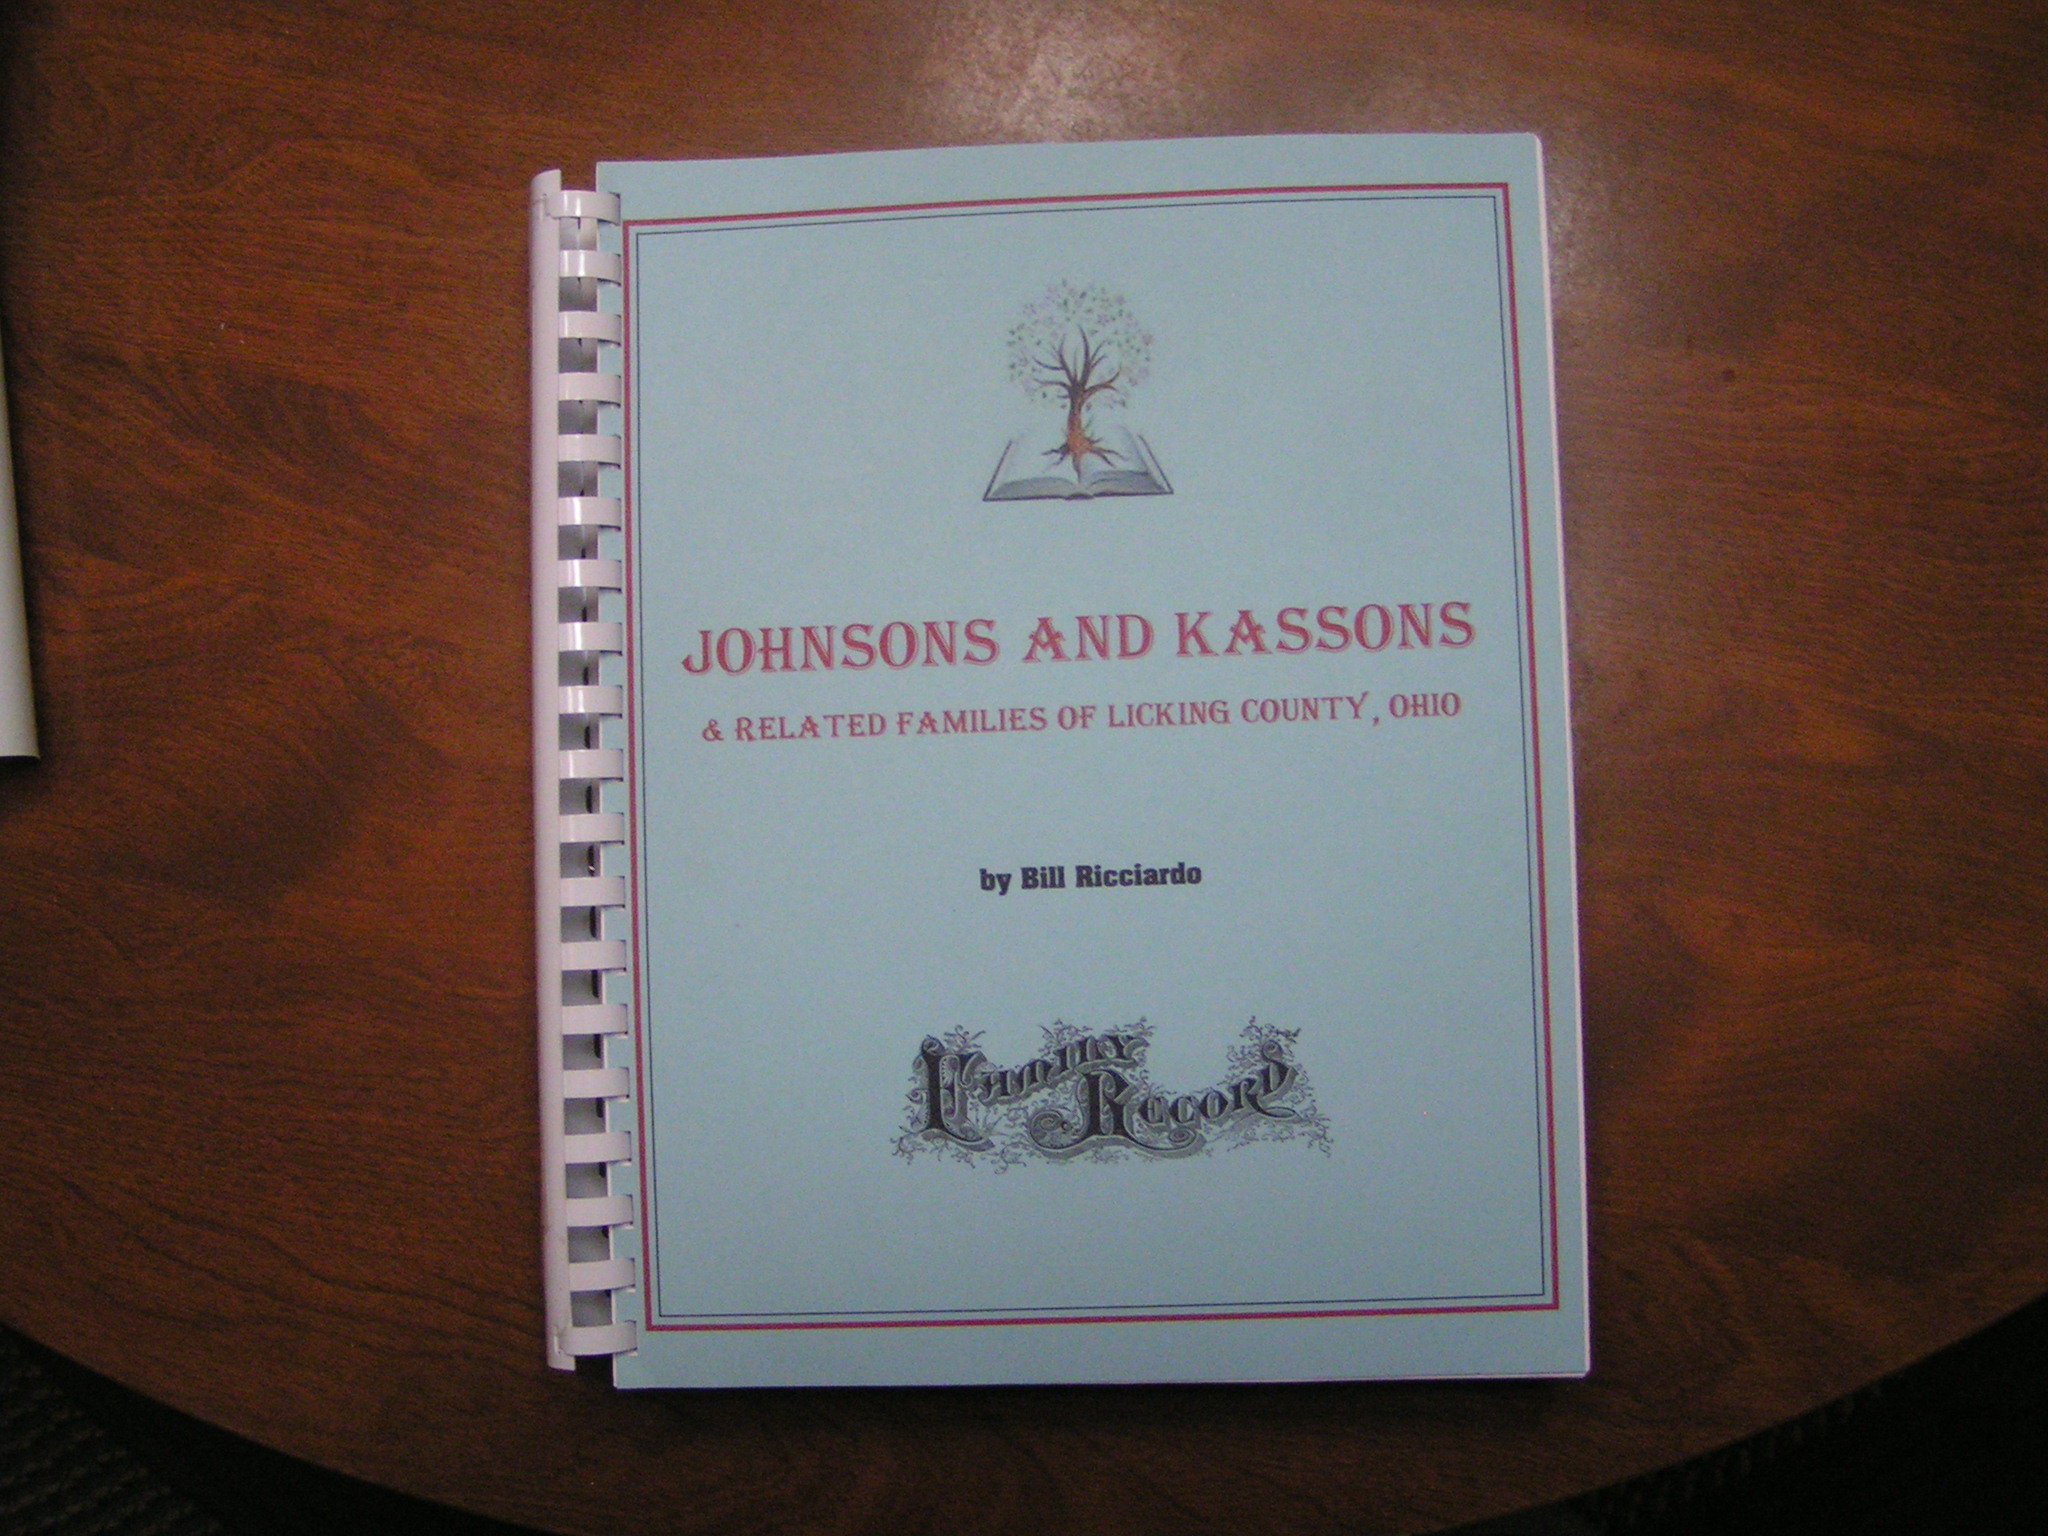 JOHNSONS and KASSONS and Related Families of Licking County, Ohio